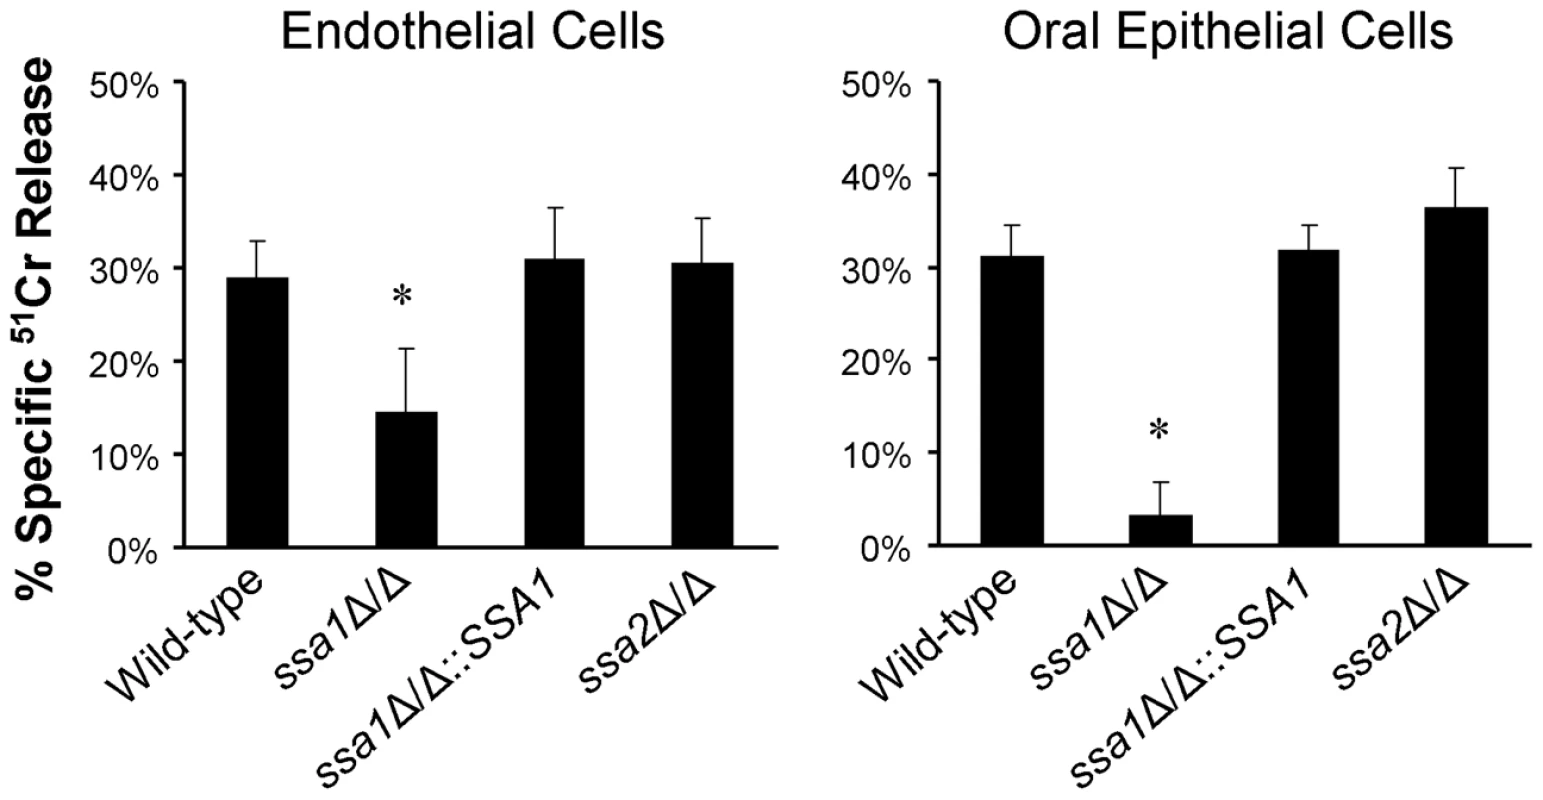 Ssa1 is necessary for <i>C. albicans</i> to cause maximal damage to endothelial cells and an oral epithelial cell line.